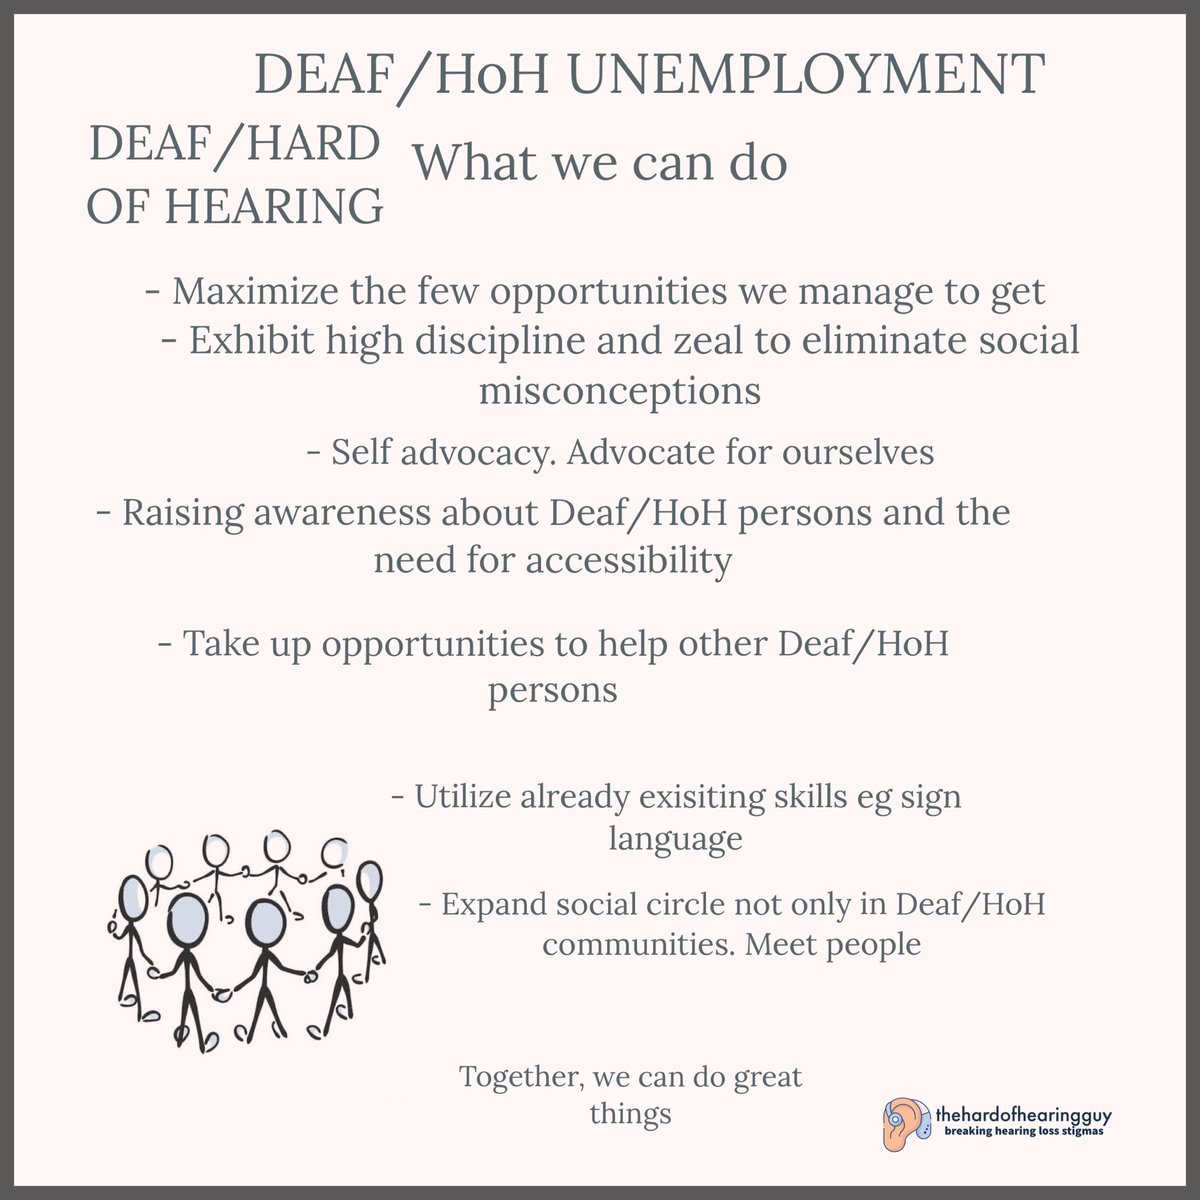 #unemployment among Deaf/HoH persons is extremely high. Here is what we can do to help

#Deaf #hearinglossawareness #UnemployedGraduates #MentaHealth #DisabilityTwitter #DisabilityInclusion #SocialFi